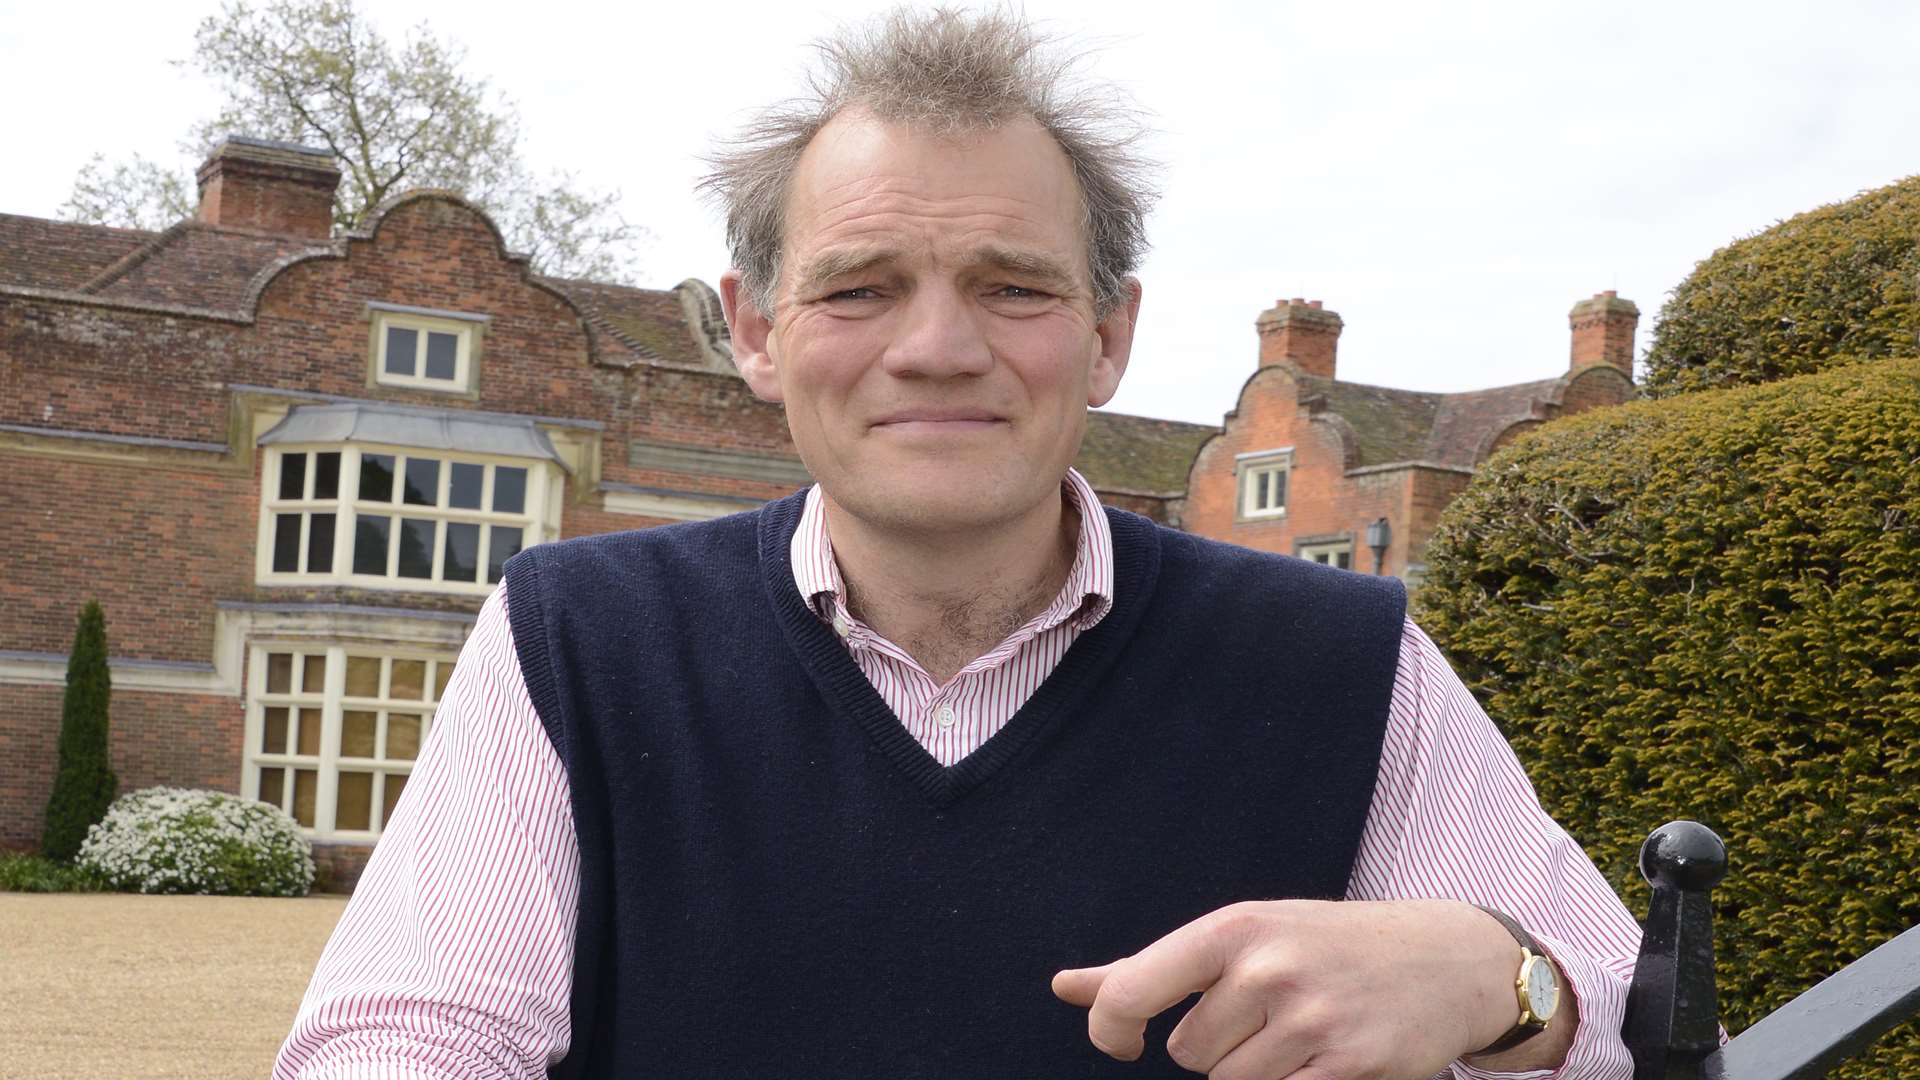 Godinton House estate manager Nick Sandford, who is chairman of the Kent branch of the Country Land and Business Association (CLA)